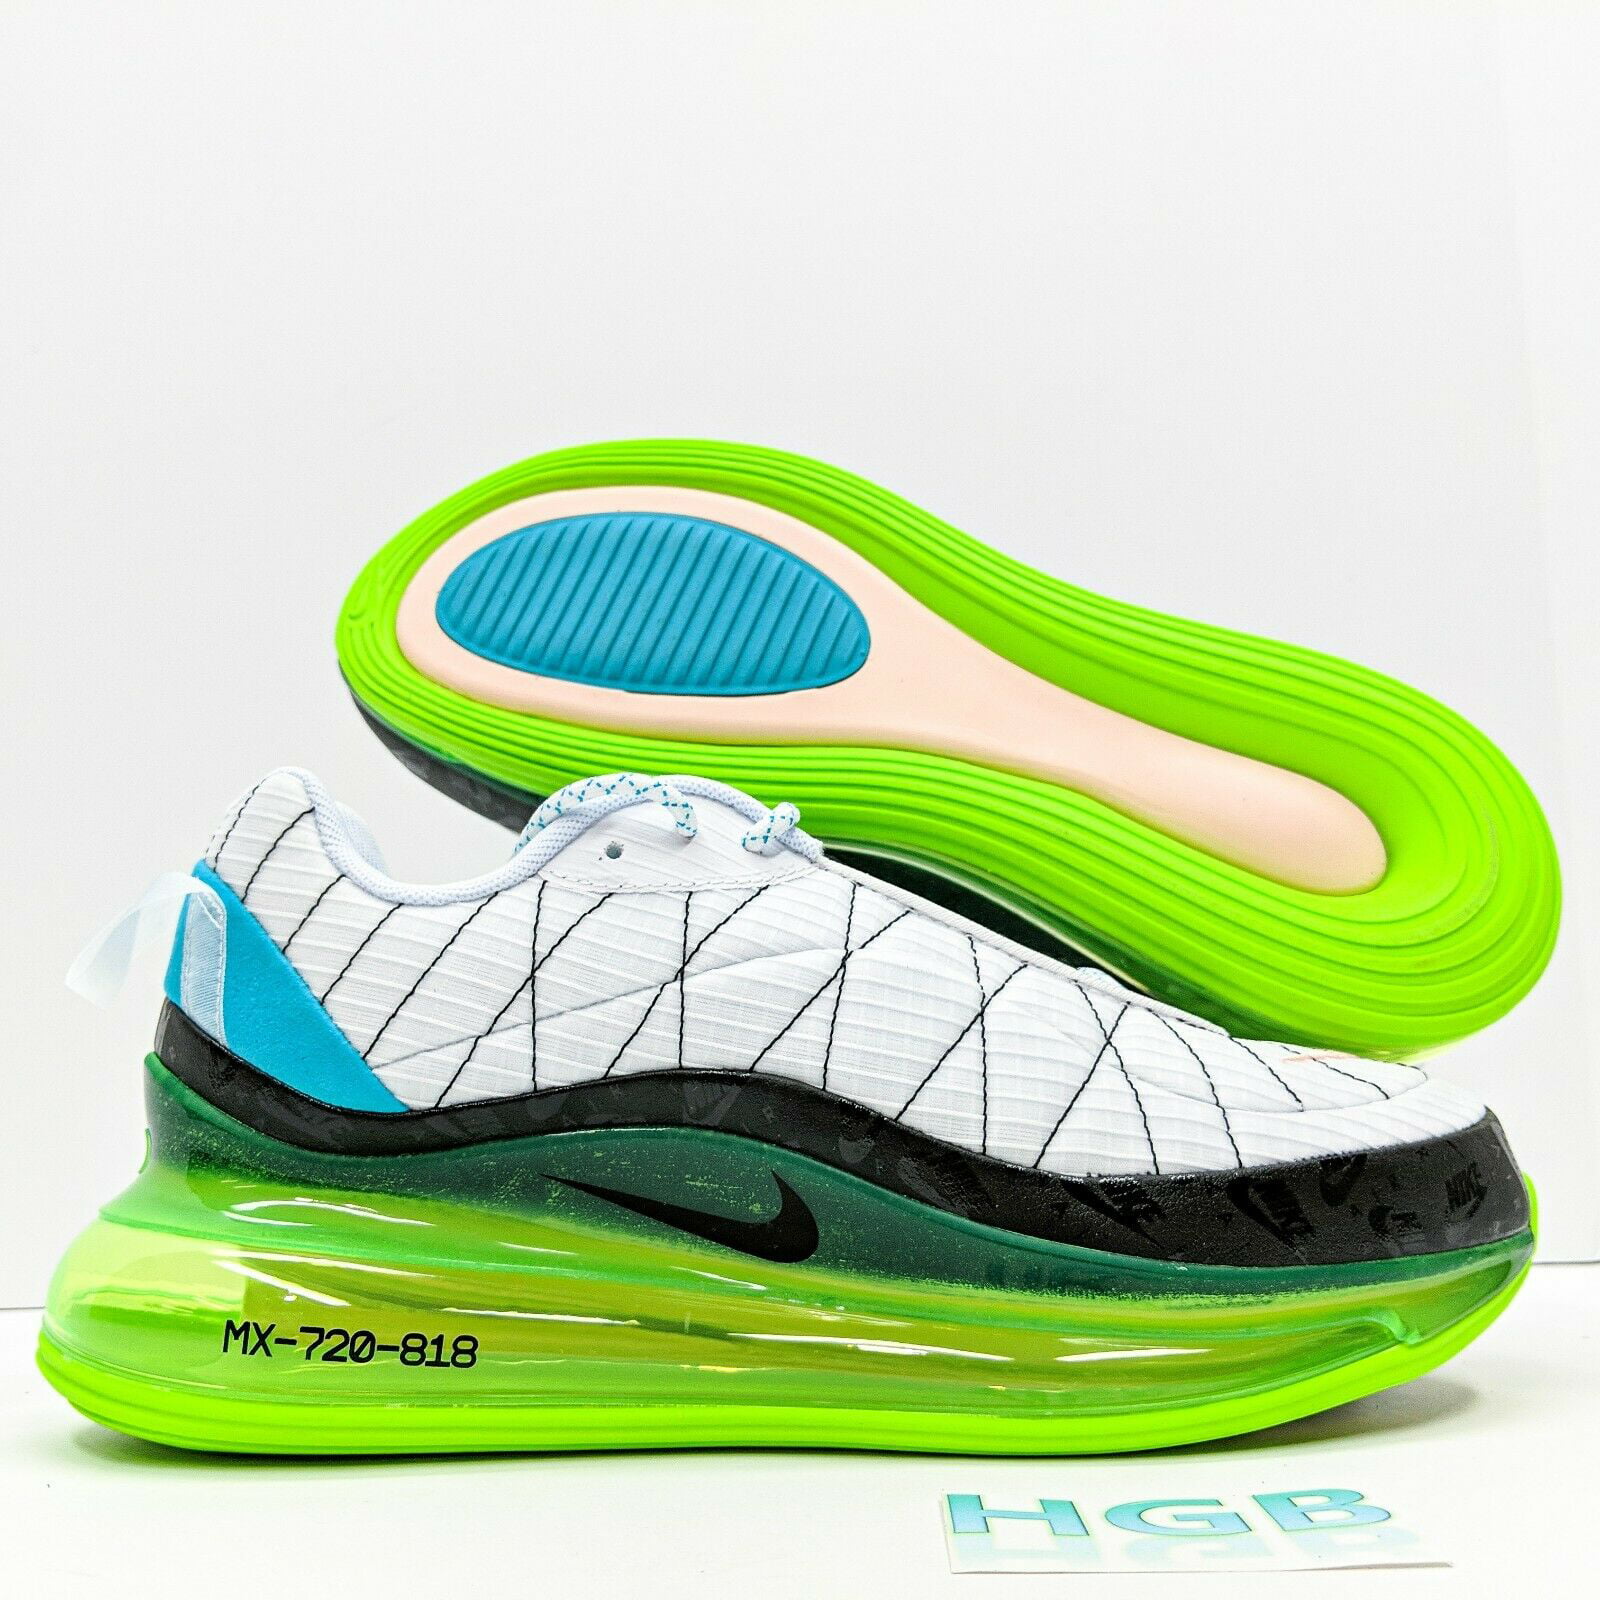 Size+12+-+Nike+Air+MX+720-818+White+Ghost+Green for sale online